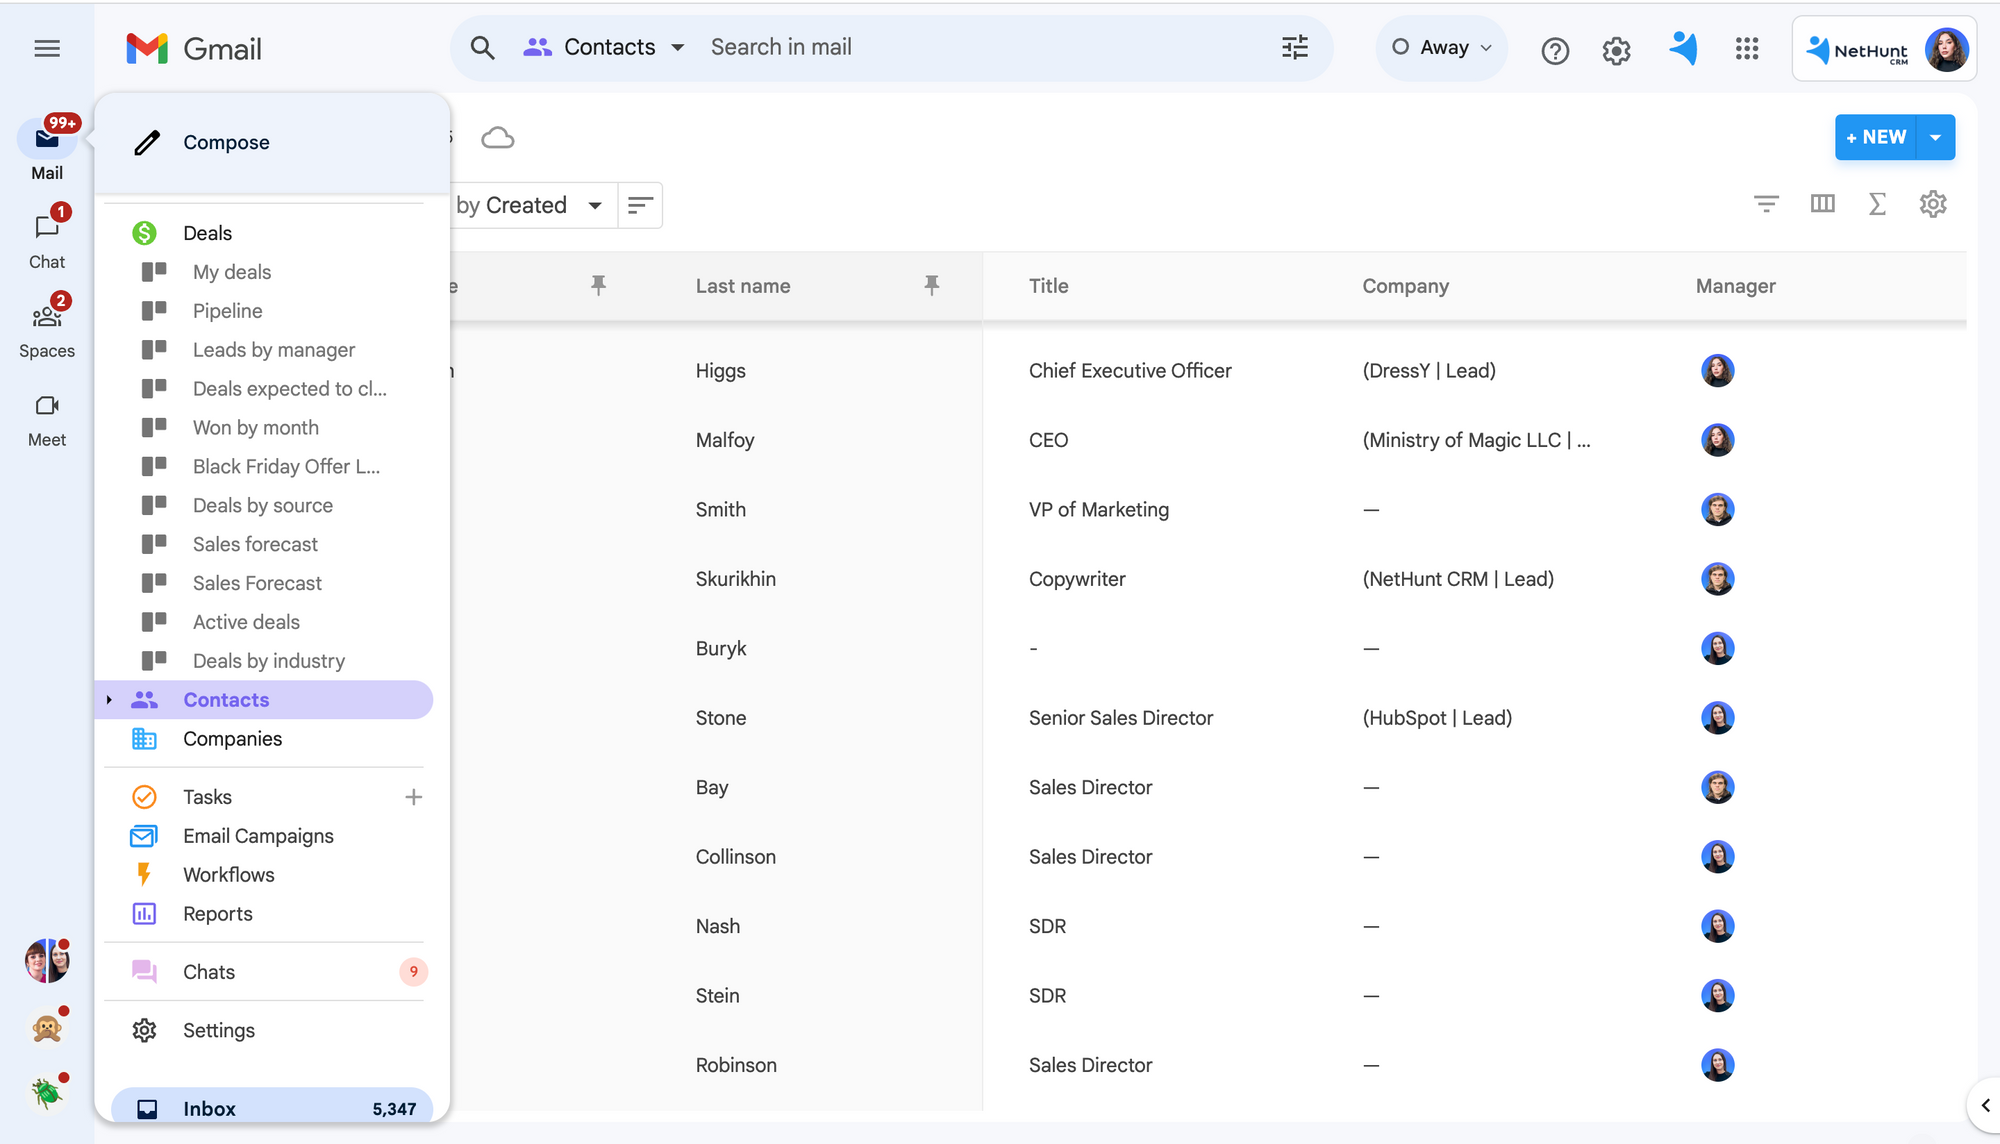 NetHunt CRM is a Gmail CRM that lives inside your Gmail inbox